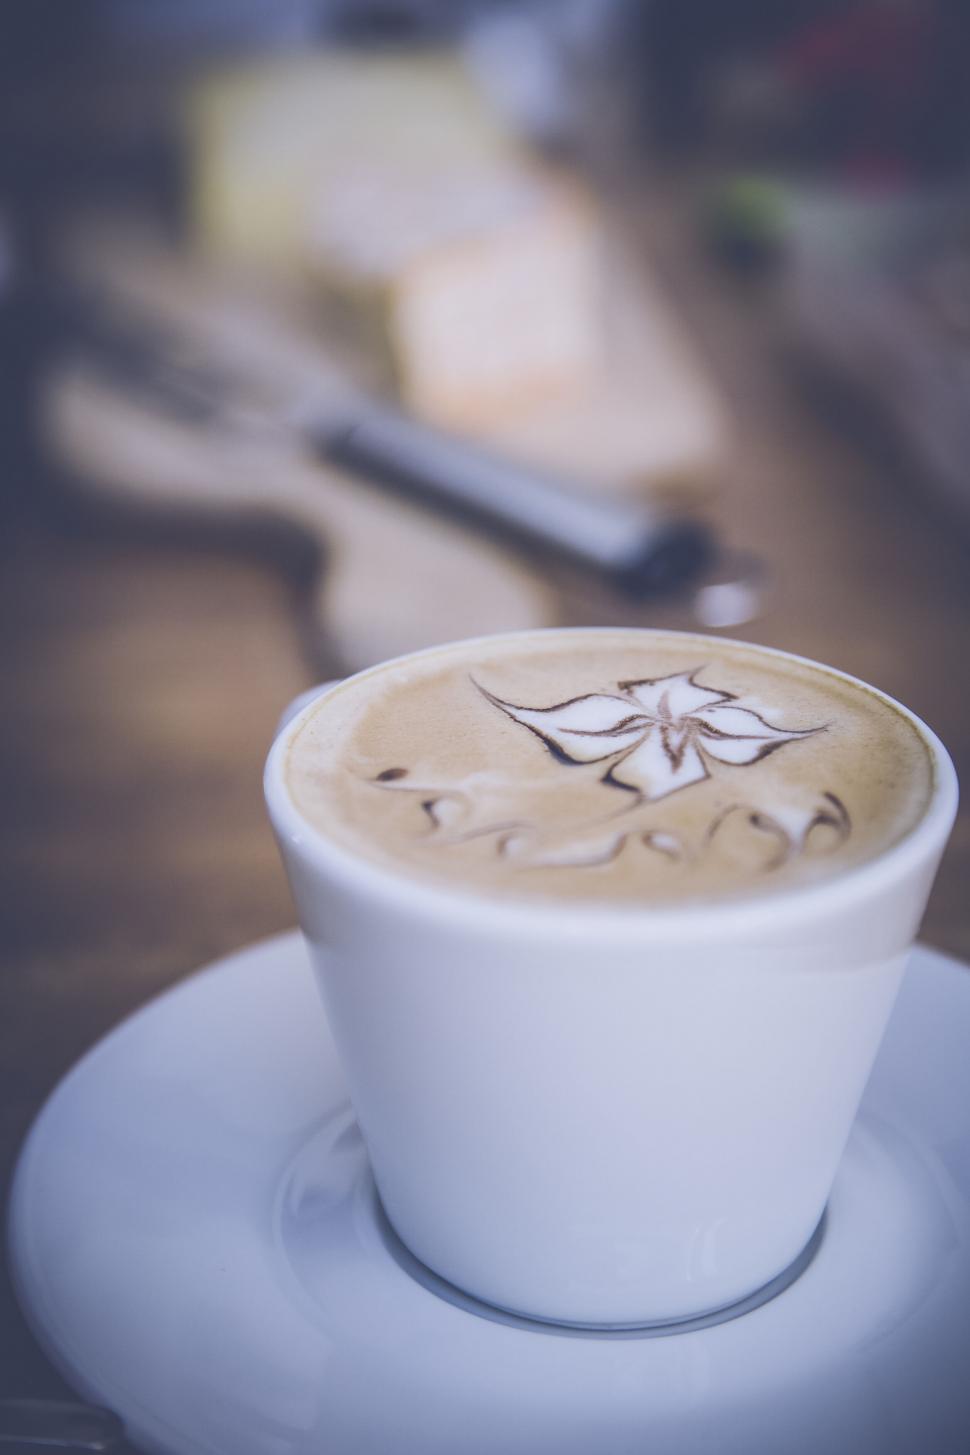 Free Image of Artistic latte in a white cup on table 